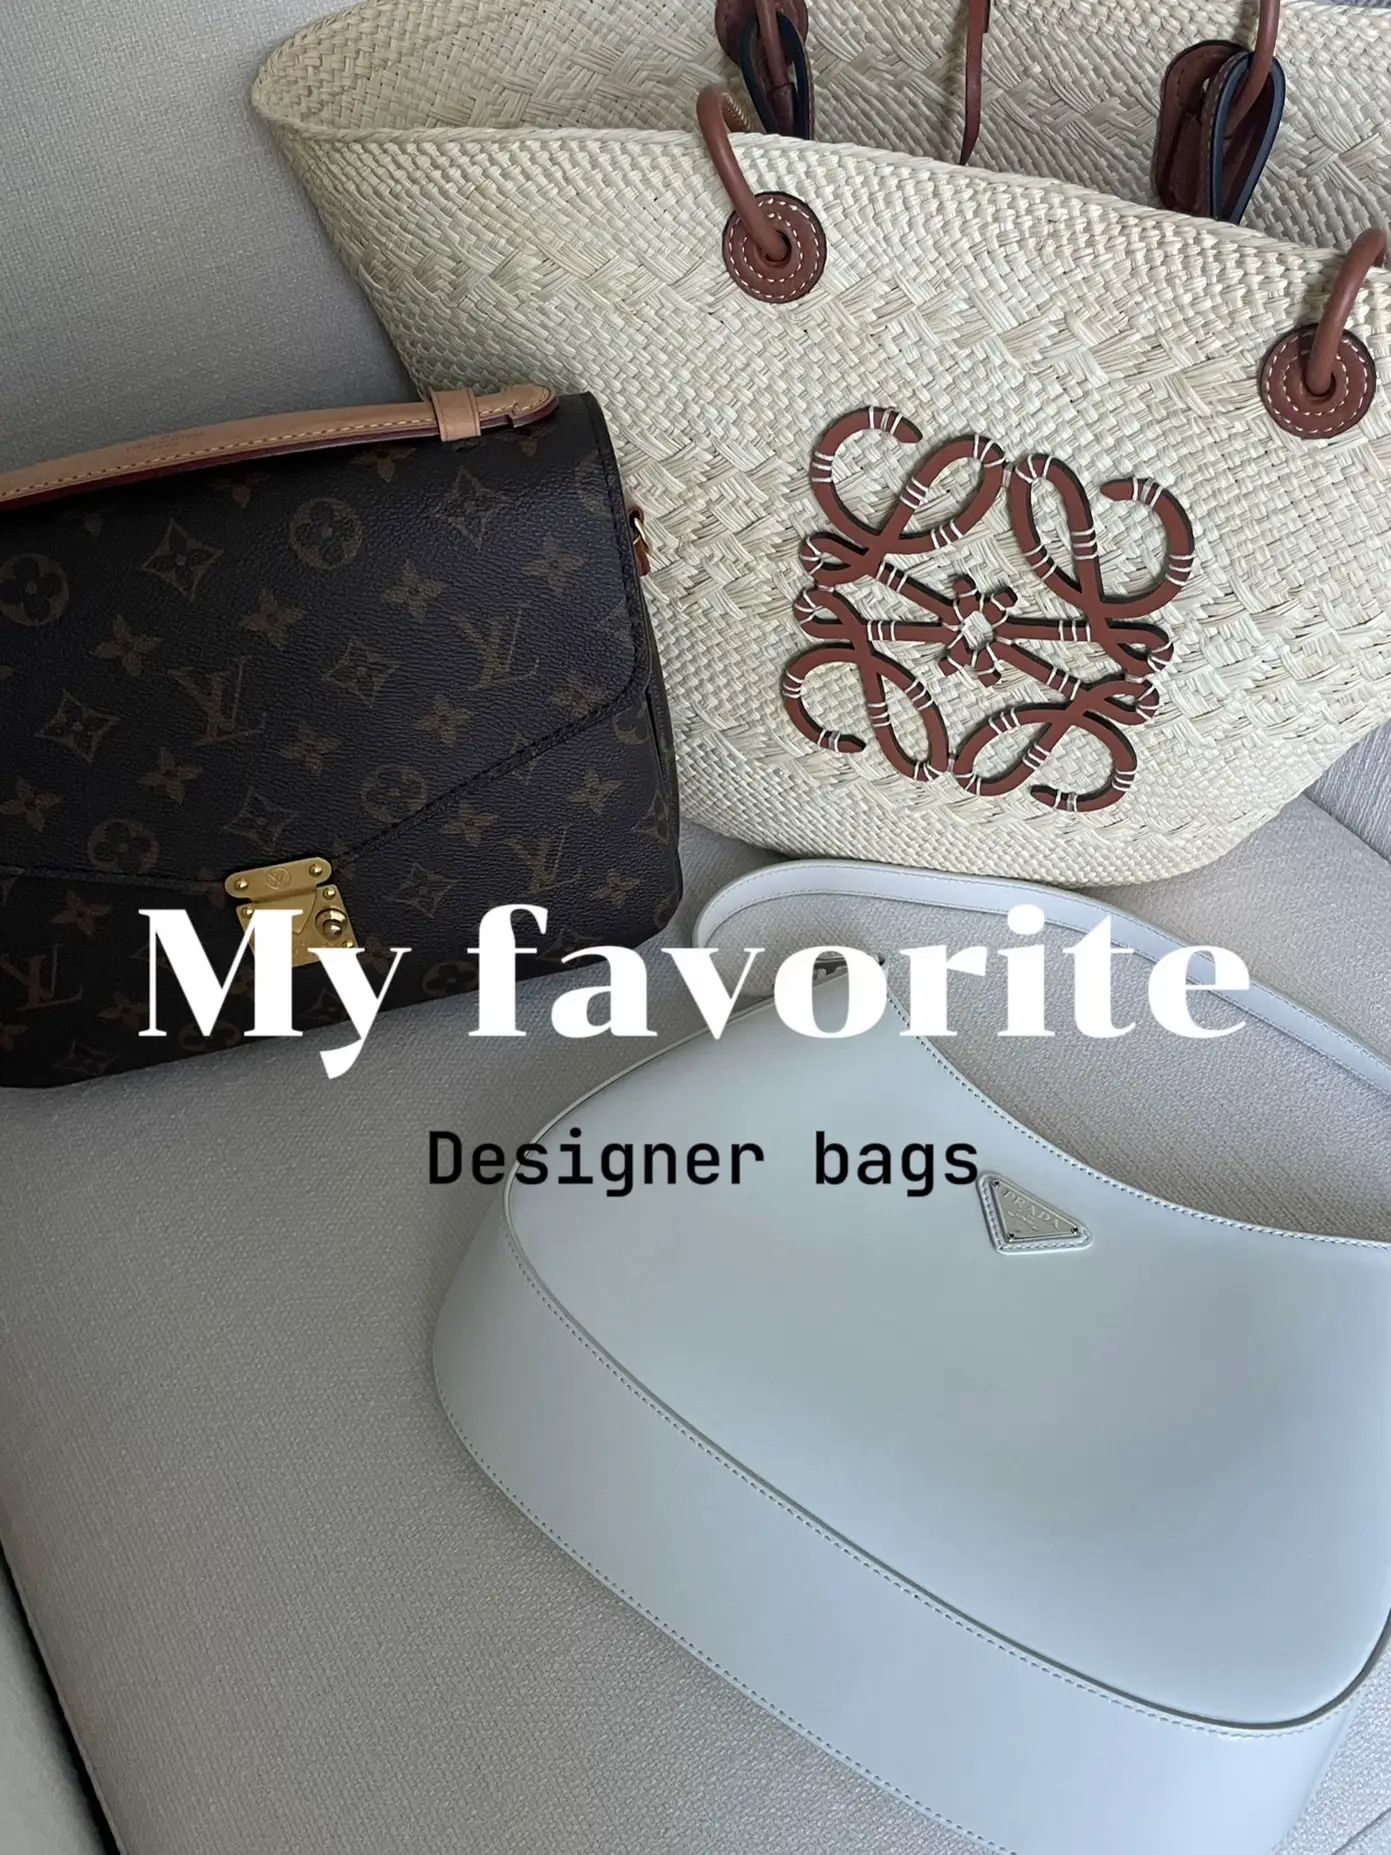 My Favorite Designer Bags, Gallery posted by Ashley Weiner